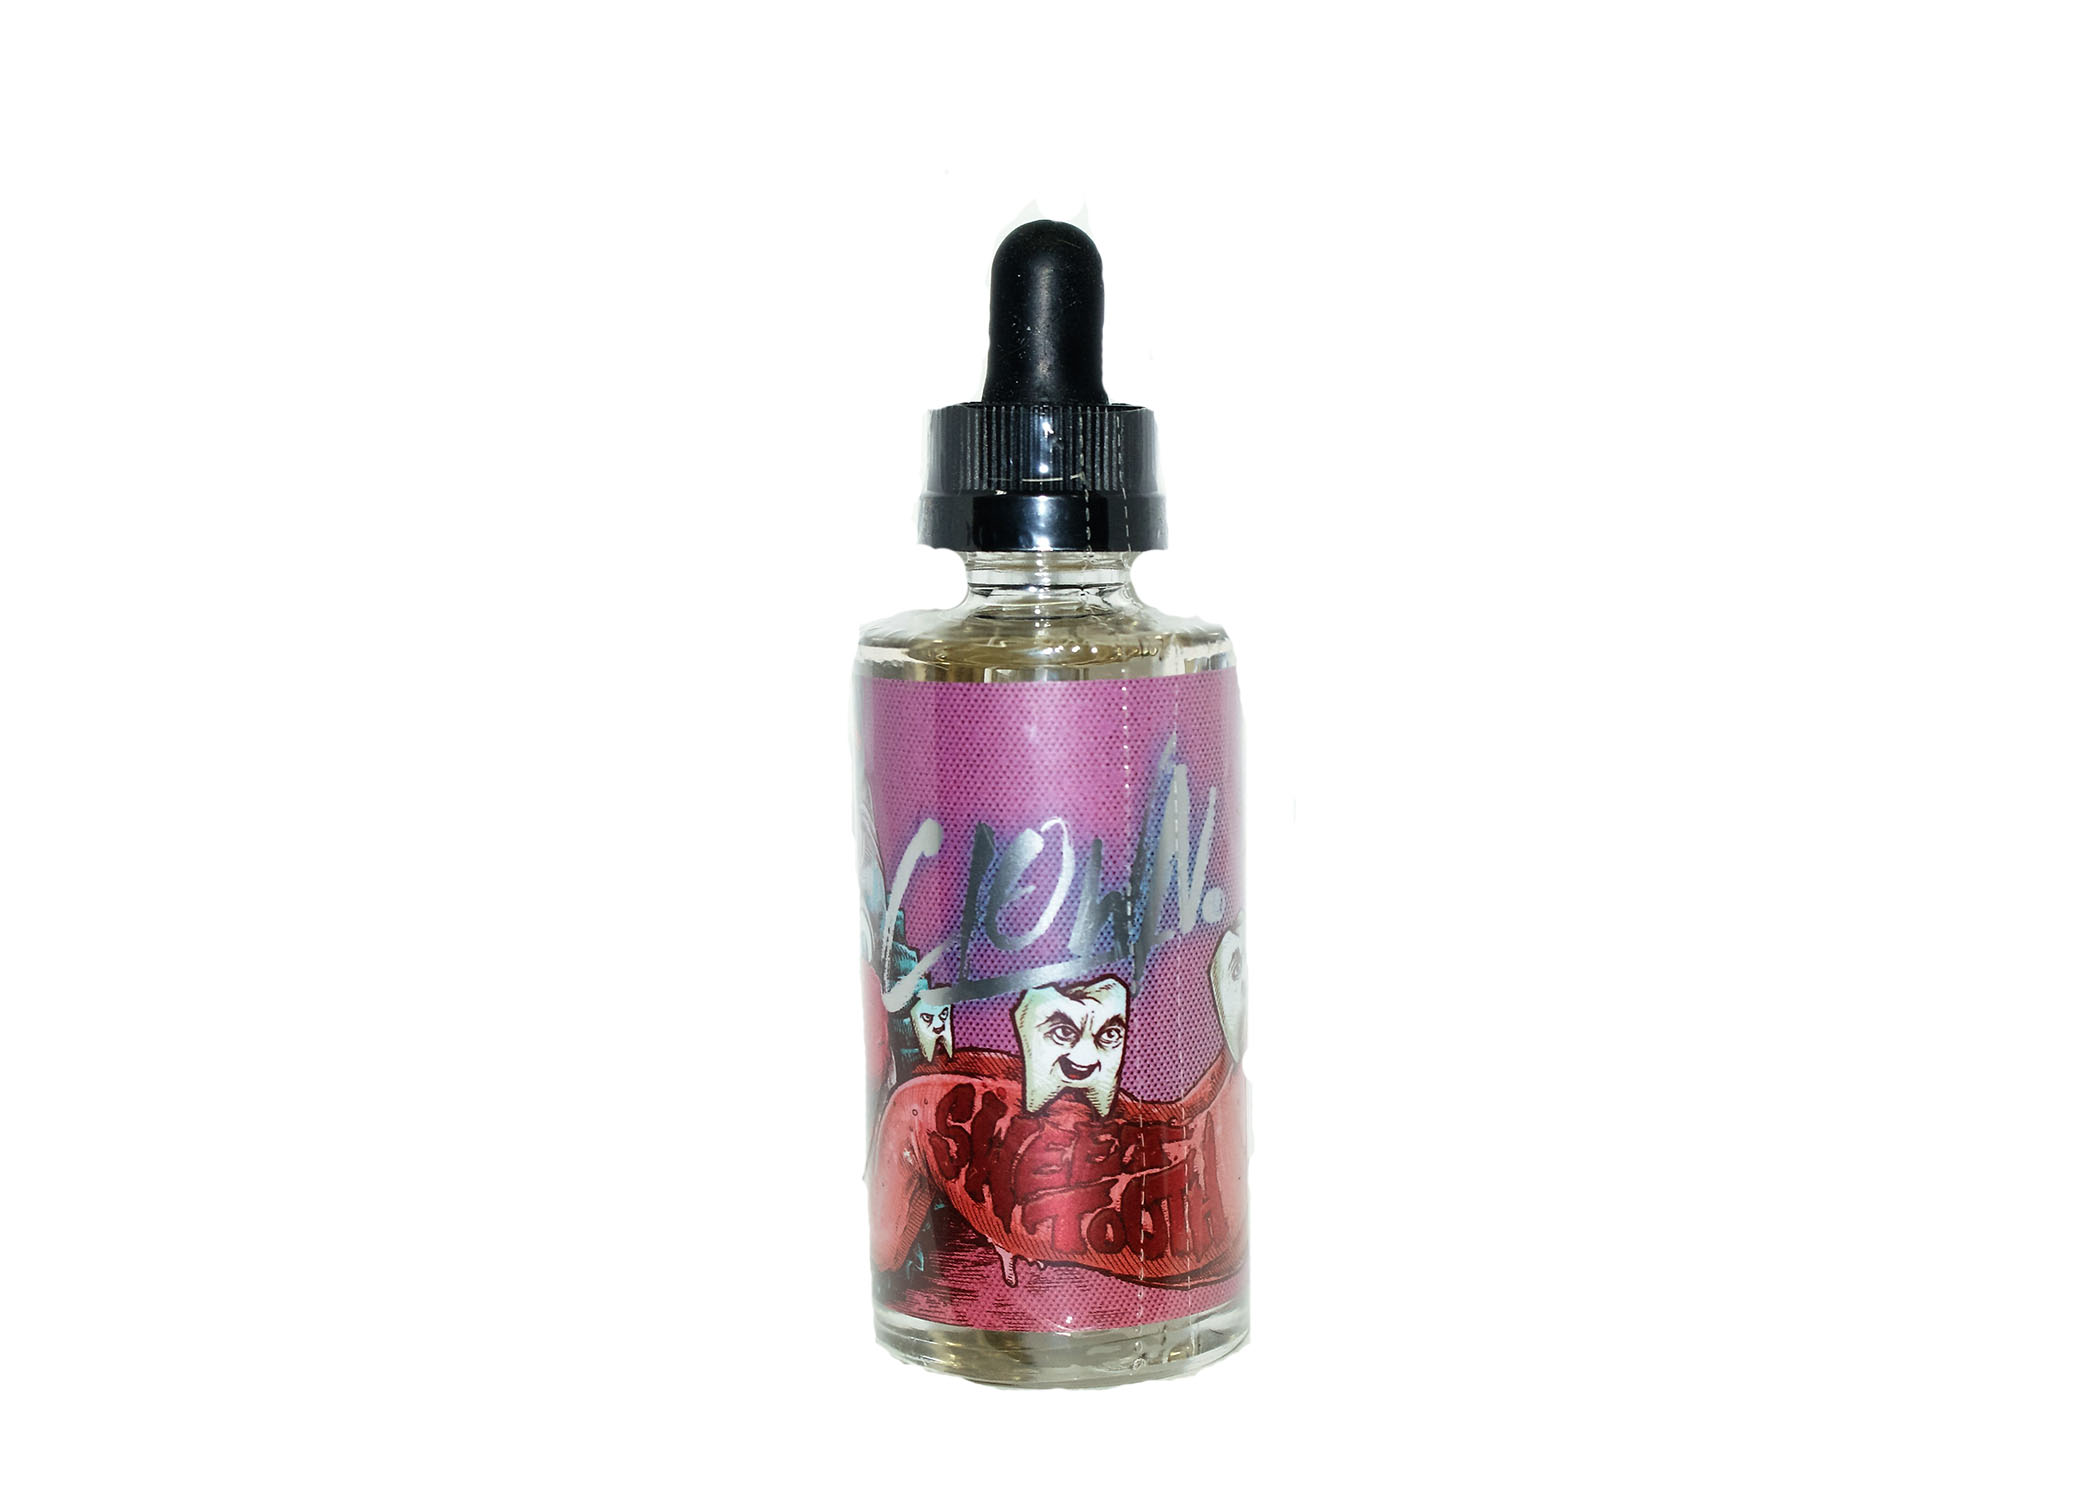 Get Your eJuice - Clown Sweet Tooth